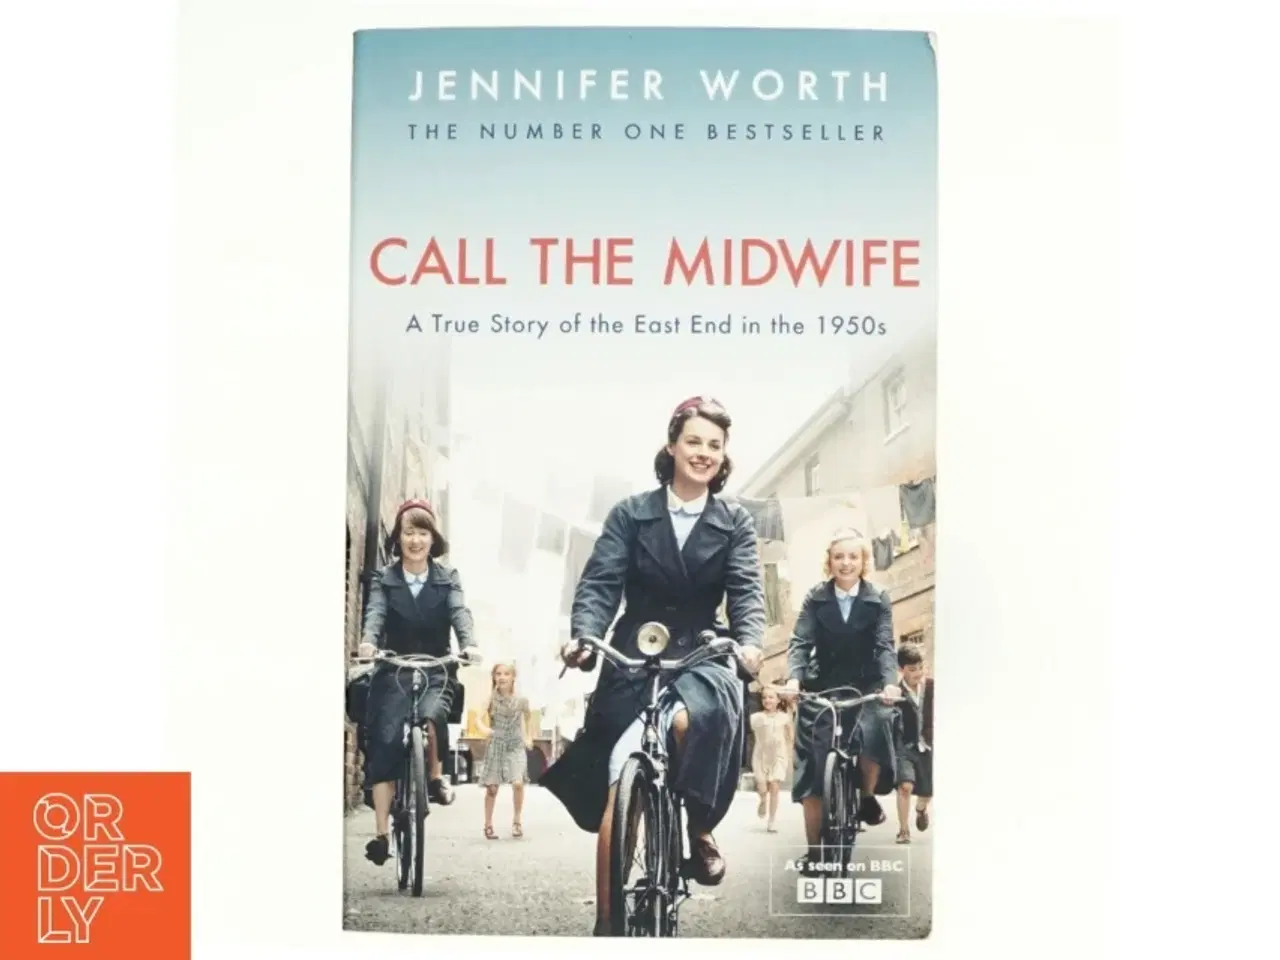 Billede 1 - Call the midwife : a true story of the East End in the 1950s af Jennifer Worth (Bog)